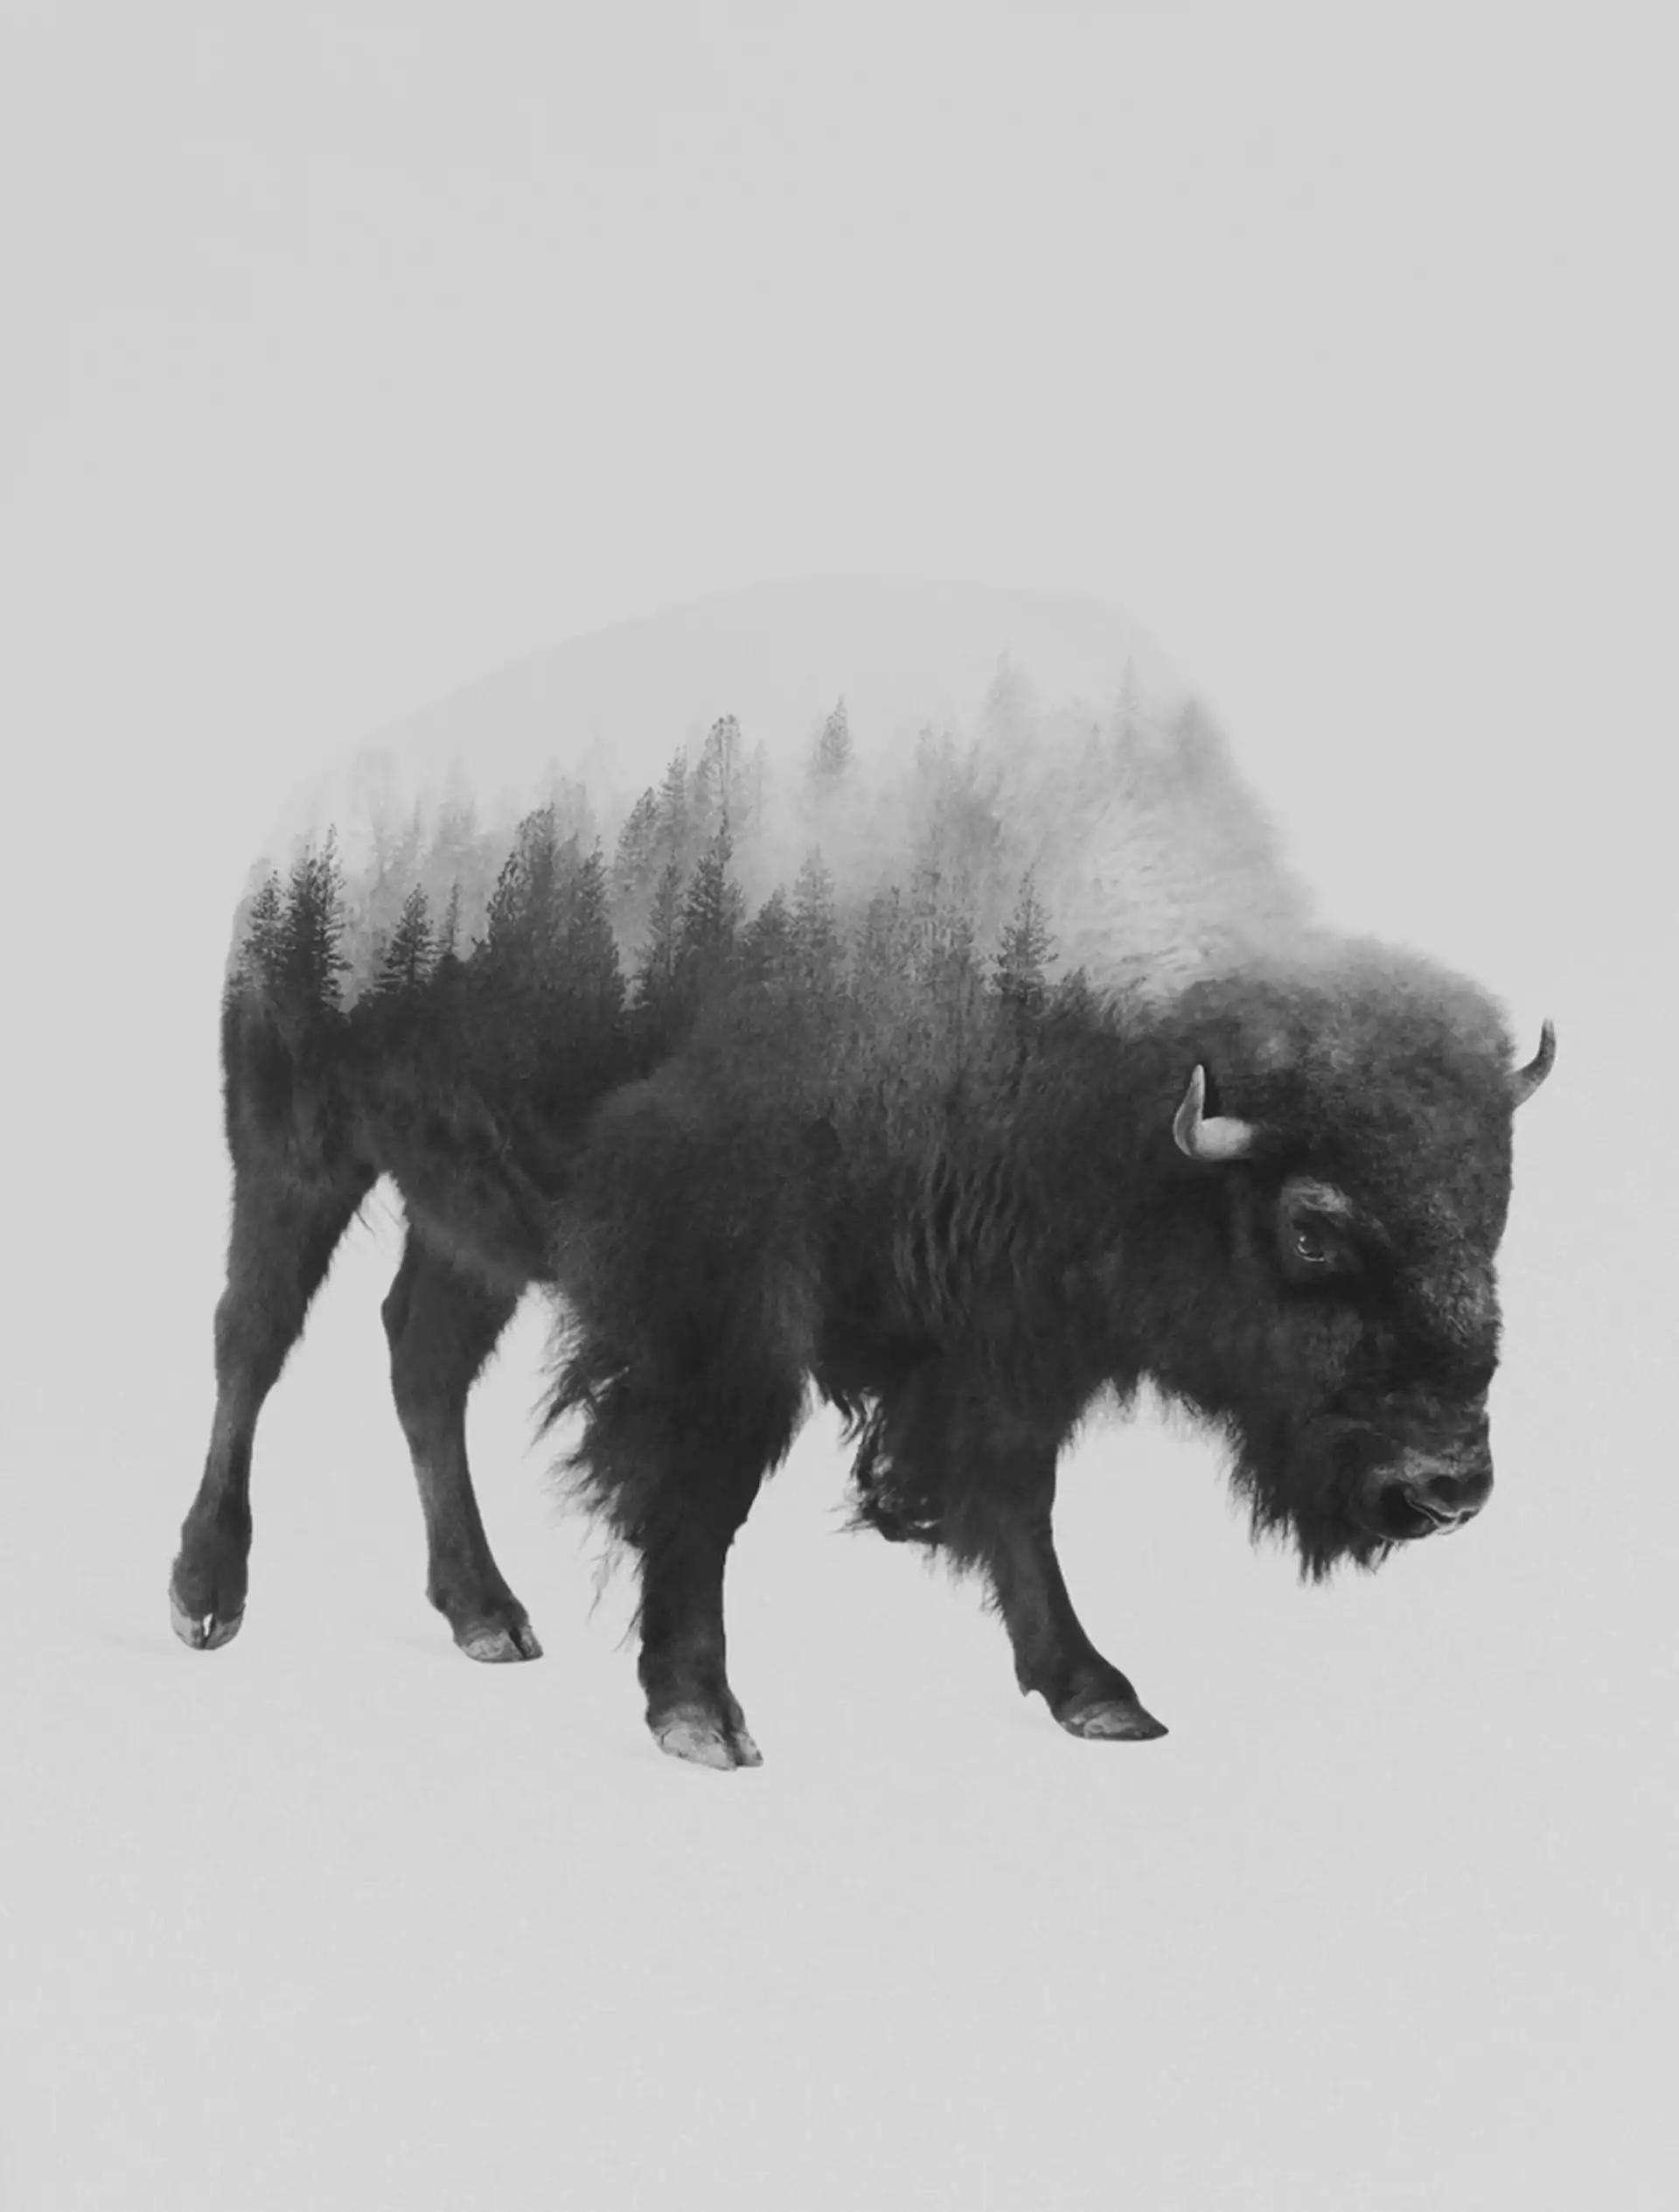 Bison (black & White Version) Art Print by Andreas Lie - LARGE